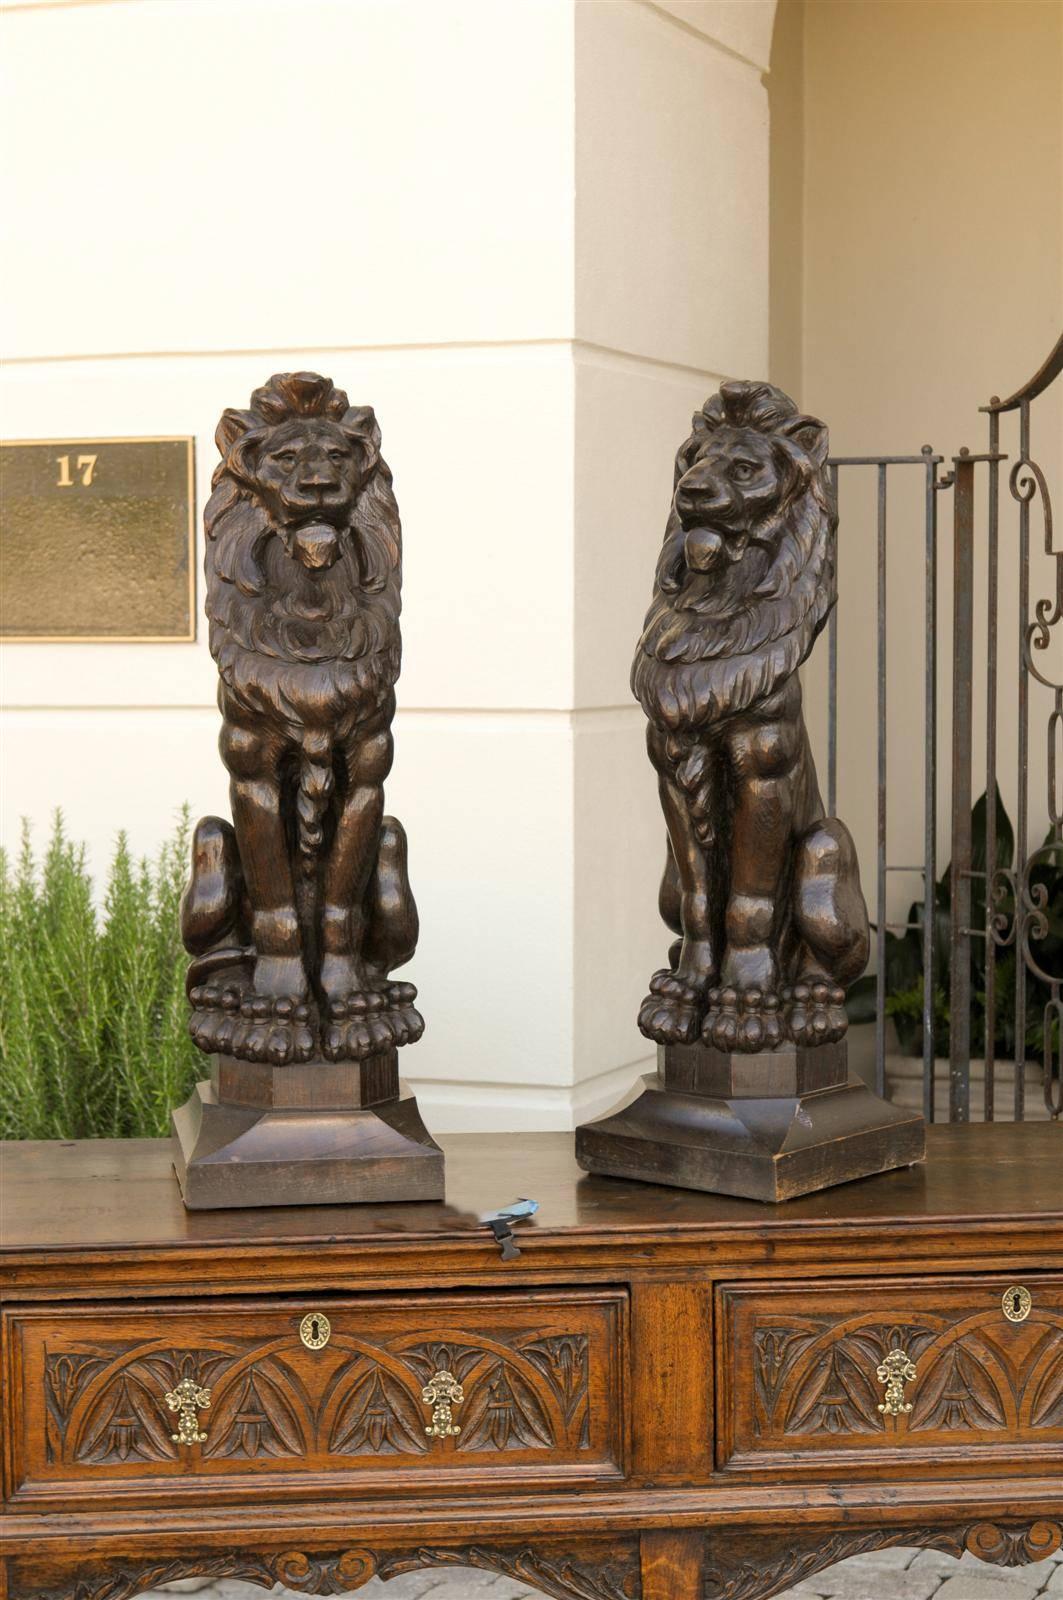 A pair of large English wooden carved lions from the late 1800s. These large English lions from the late 19th century are made of carved wood. The precision of the carving is quite impressive, the lions' manes are very detailed, and the instrument